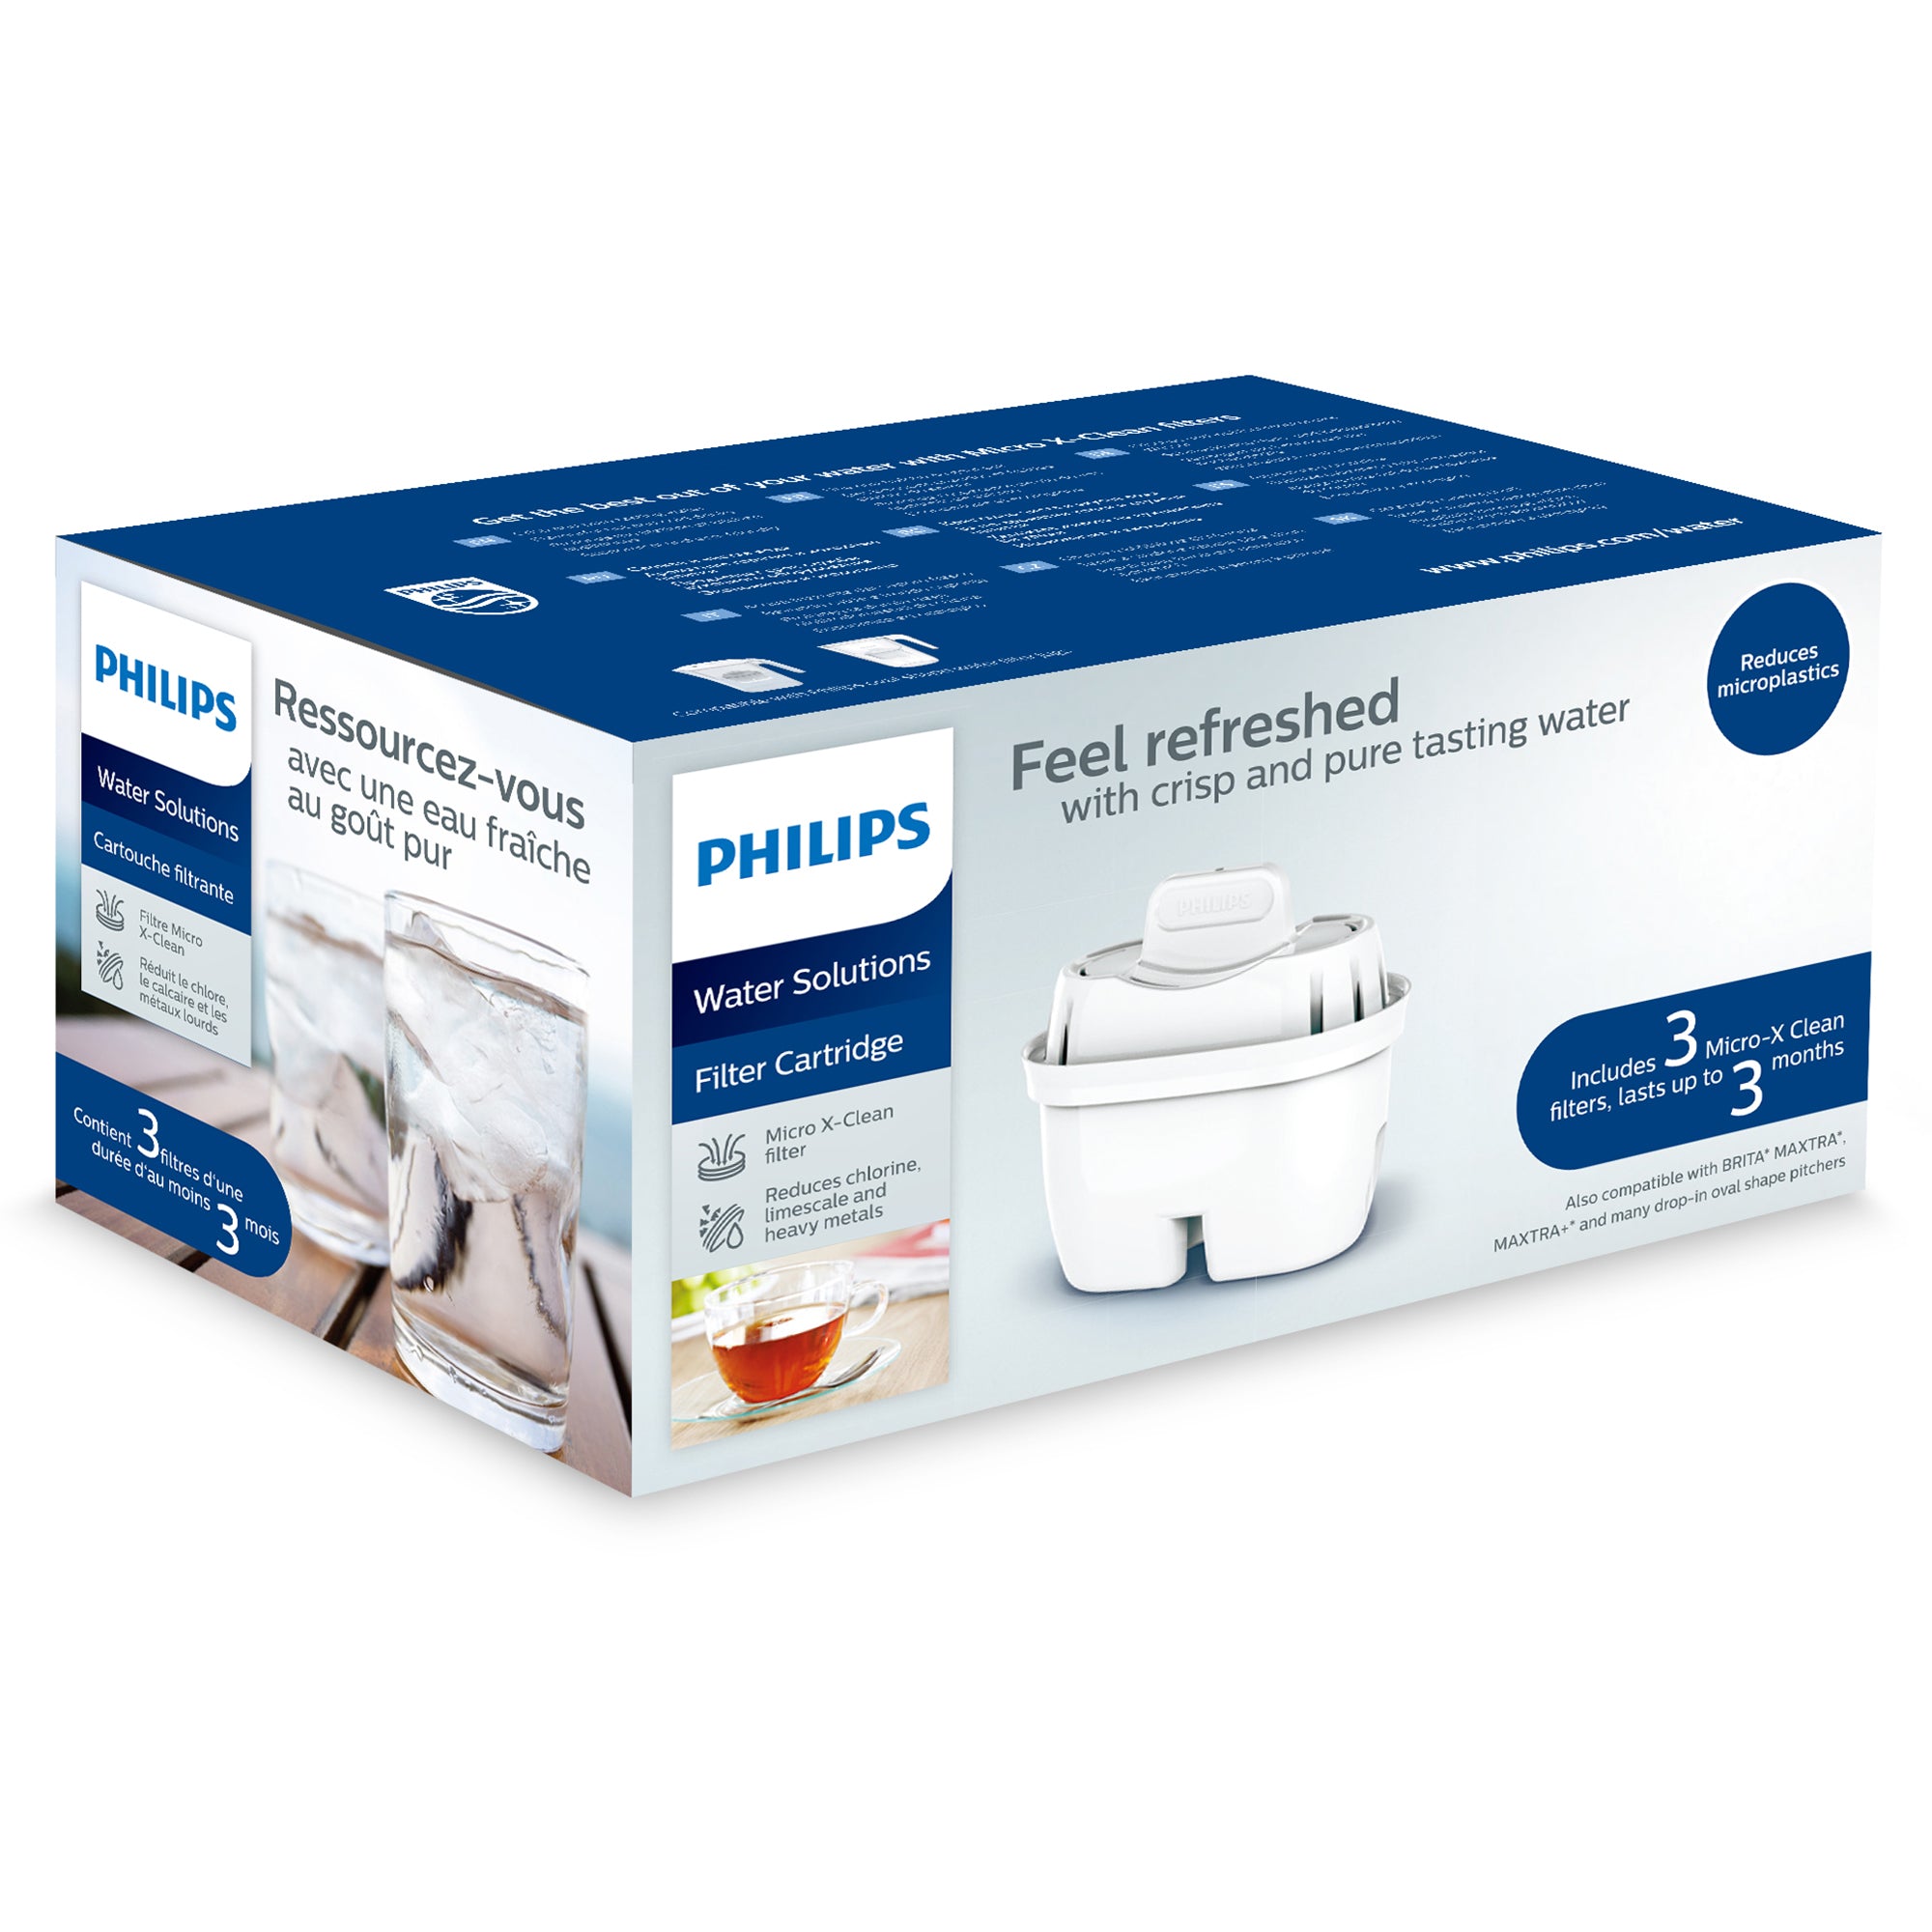 Philips Micro X-Clean Carbon Filter AWP211 for MF Water Station (12-pack)